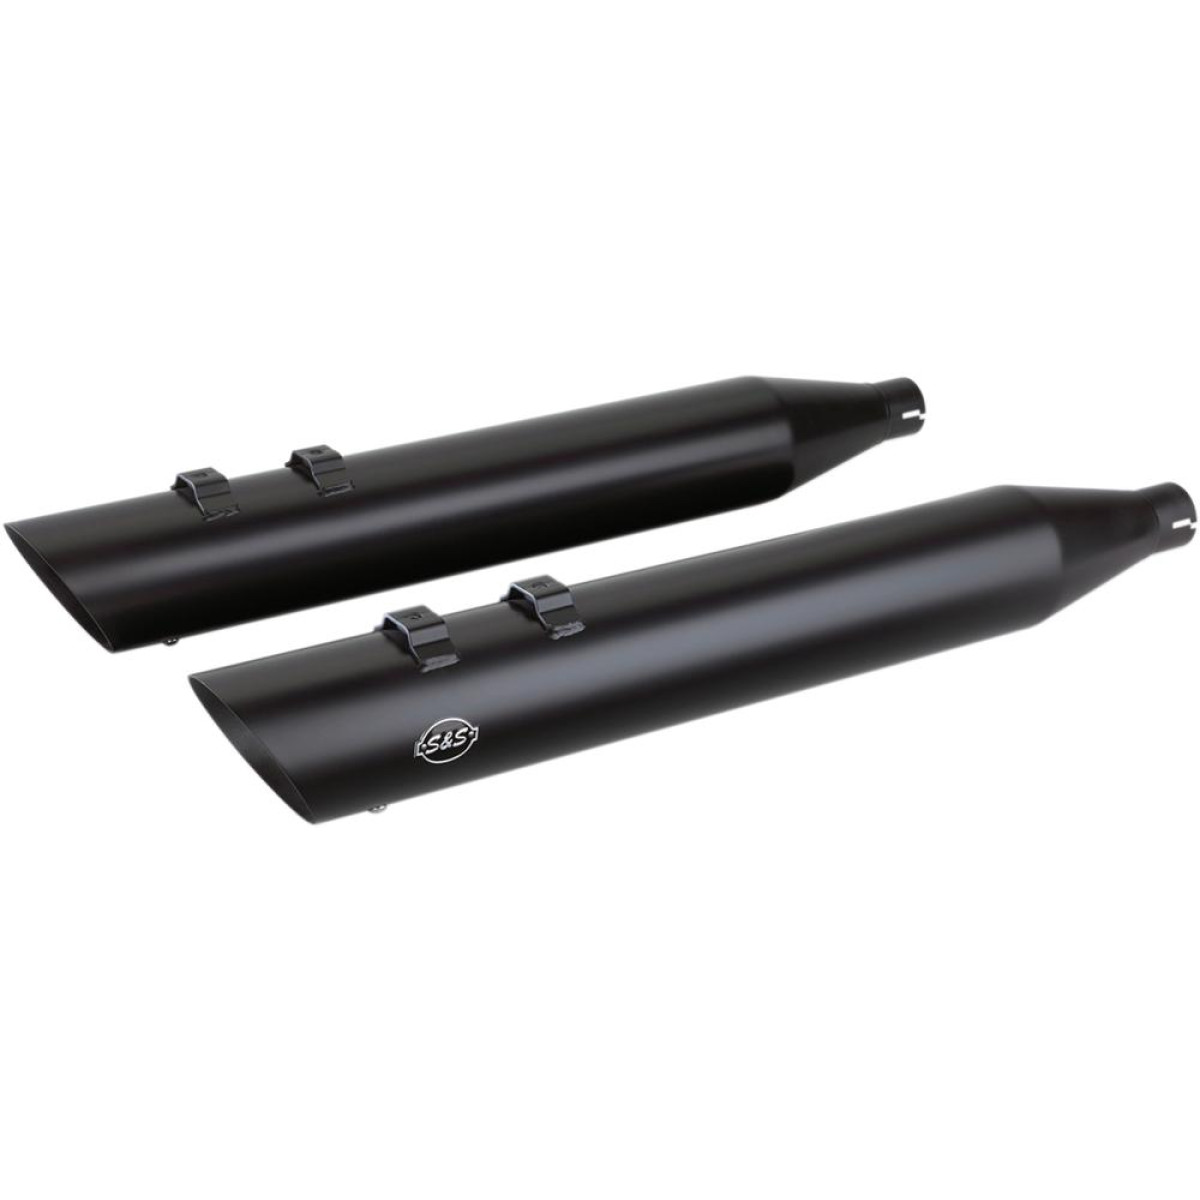 S&S CYCLE Exhaust MUFFER SLIP-ON SLASH CUT END 4" TOURING BLACK - 17-18 HD Touring Models